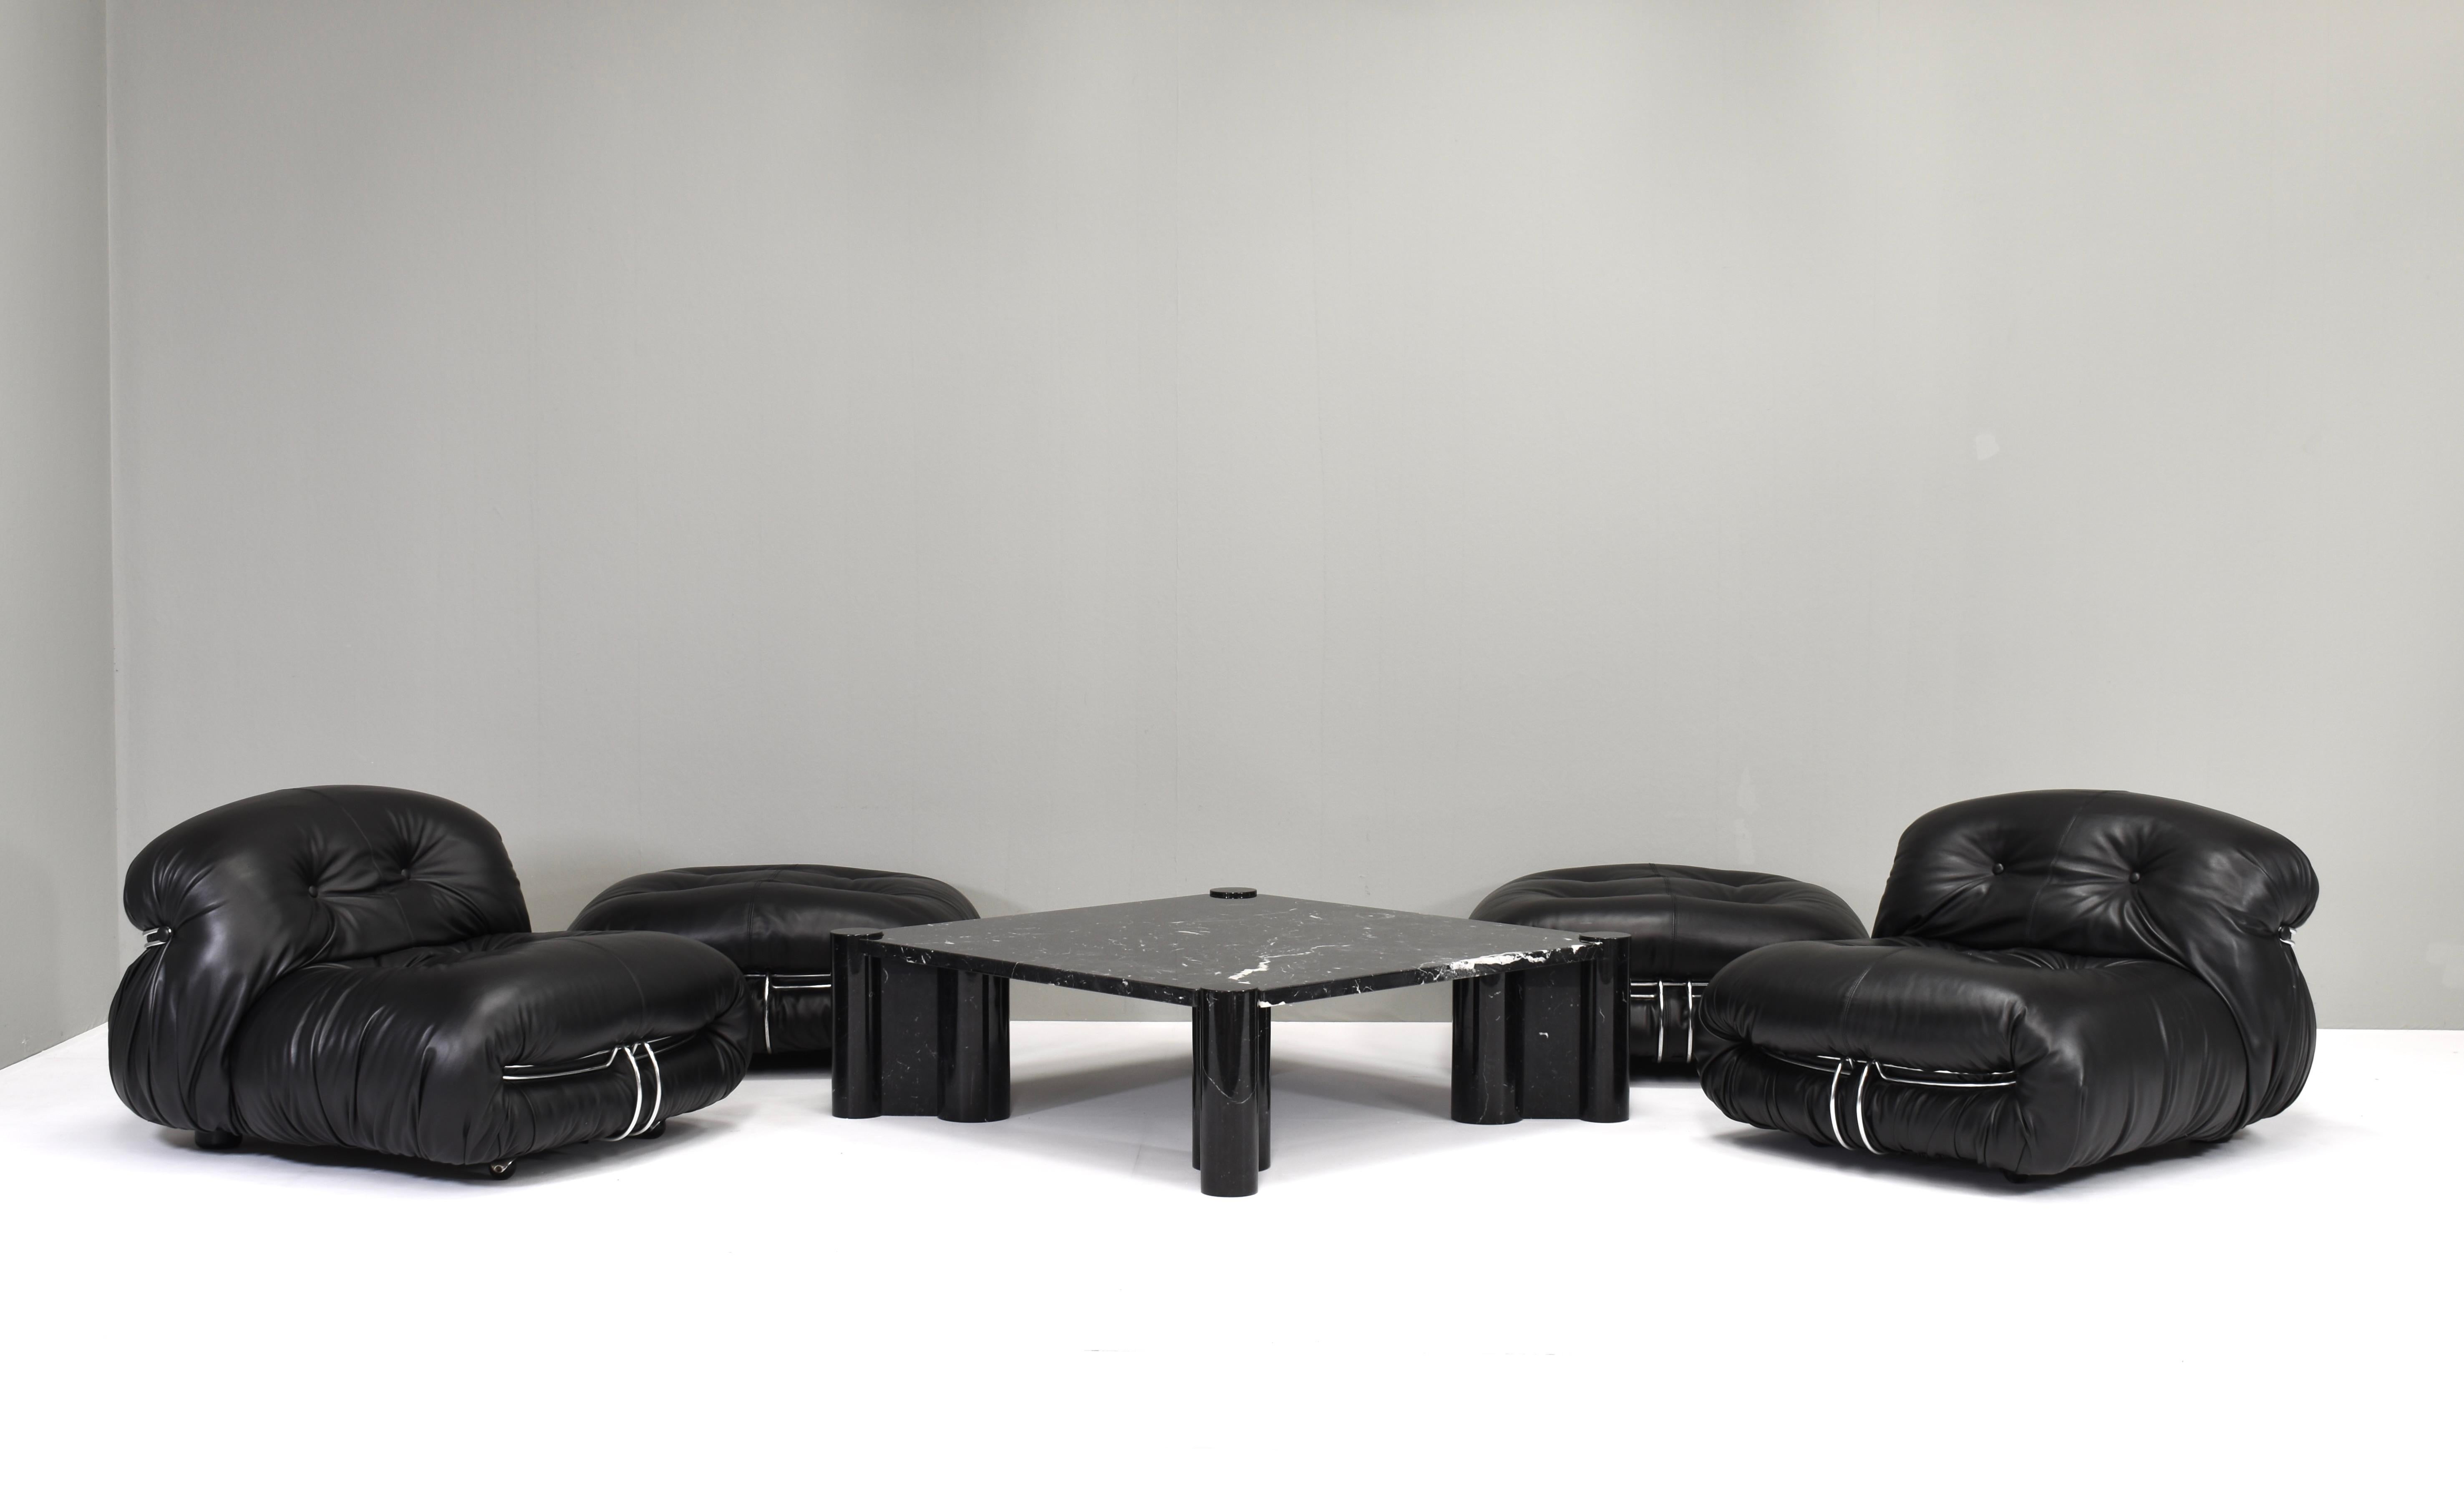 Impressive square coffee table by Gae Aulenti for Knoll. The table is made of nero marquina marble and designed in 1965 by Aulenti and taken in production by Knoll in 1972.
In very good condition. Beautiful gloss and almost no scratching.
Labels